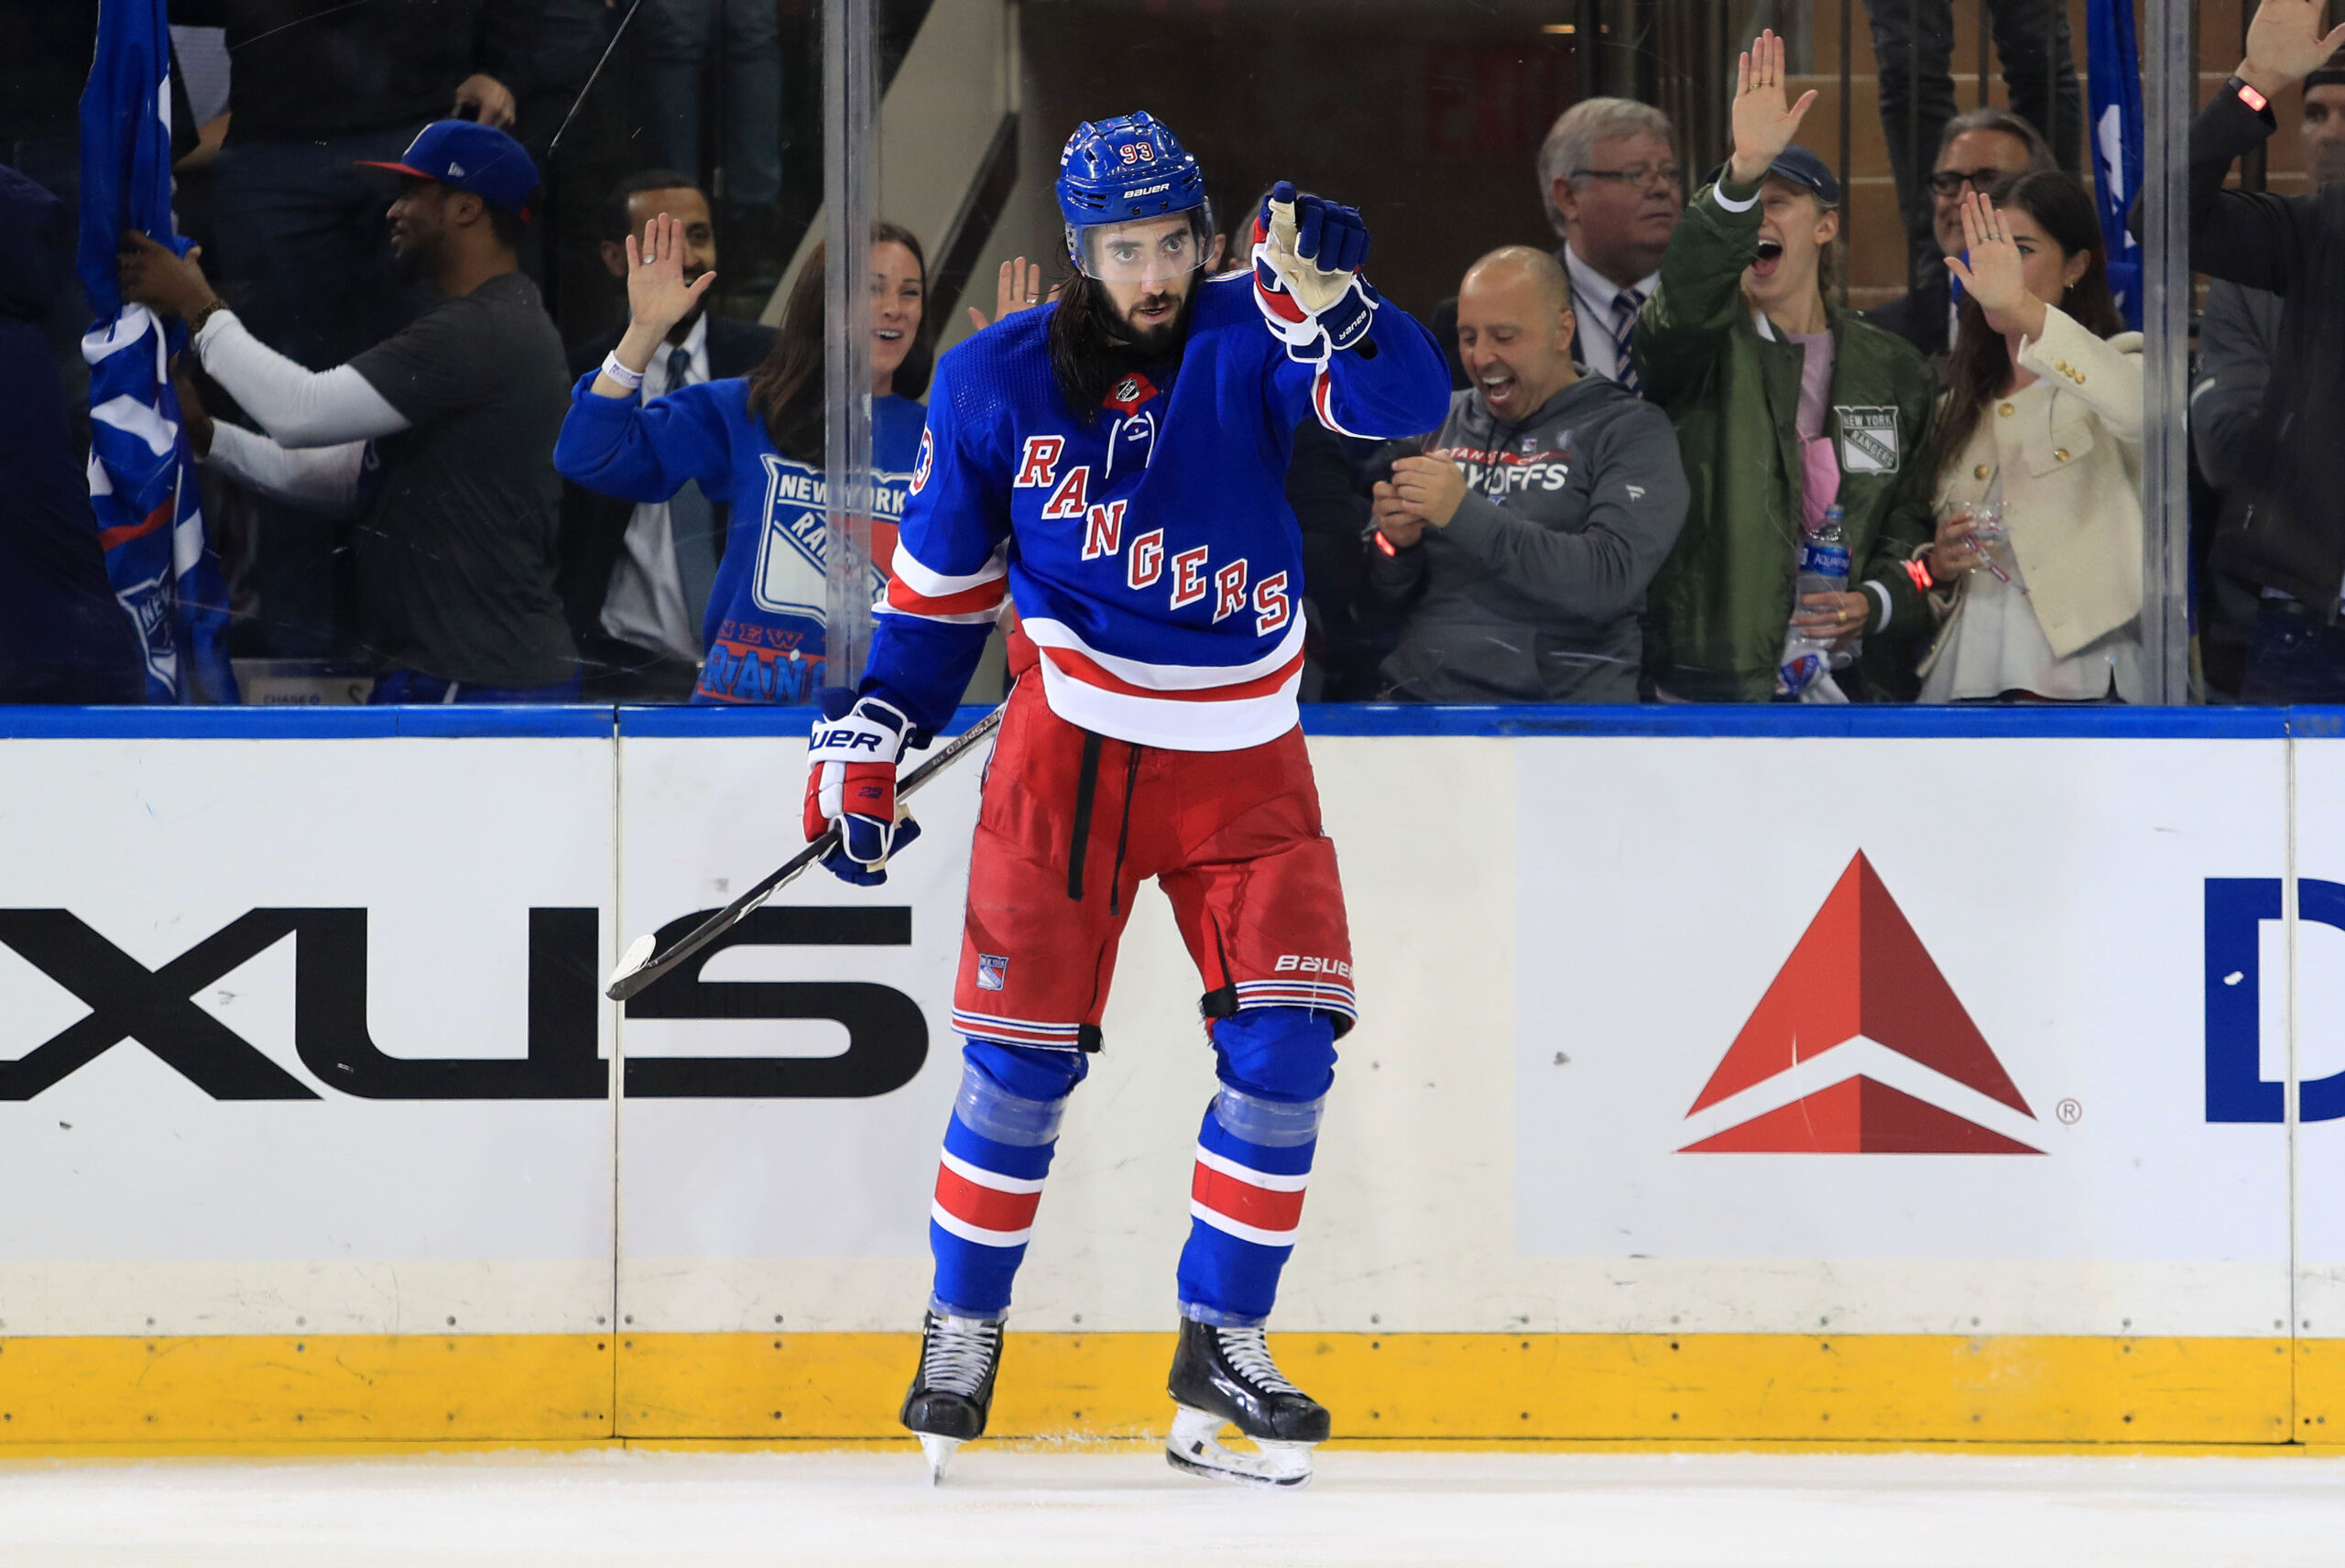 Mika Zibanejad's 5 Goals for the Rangers Help Bring the Playoffs Into View  - The New York Times